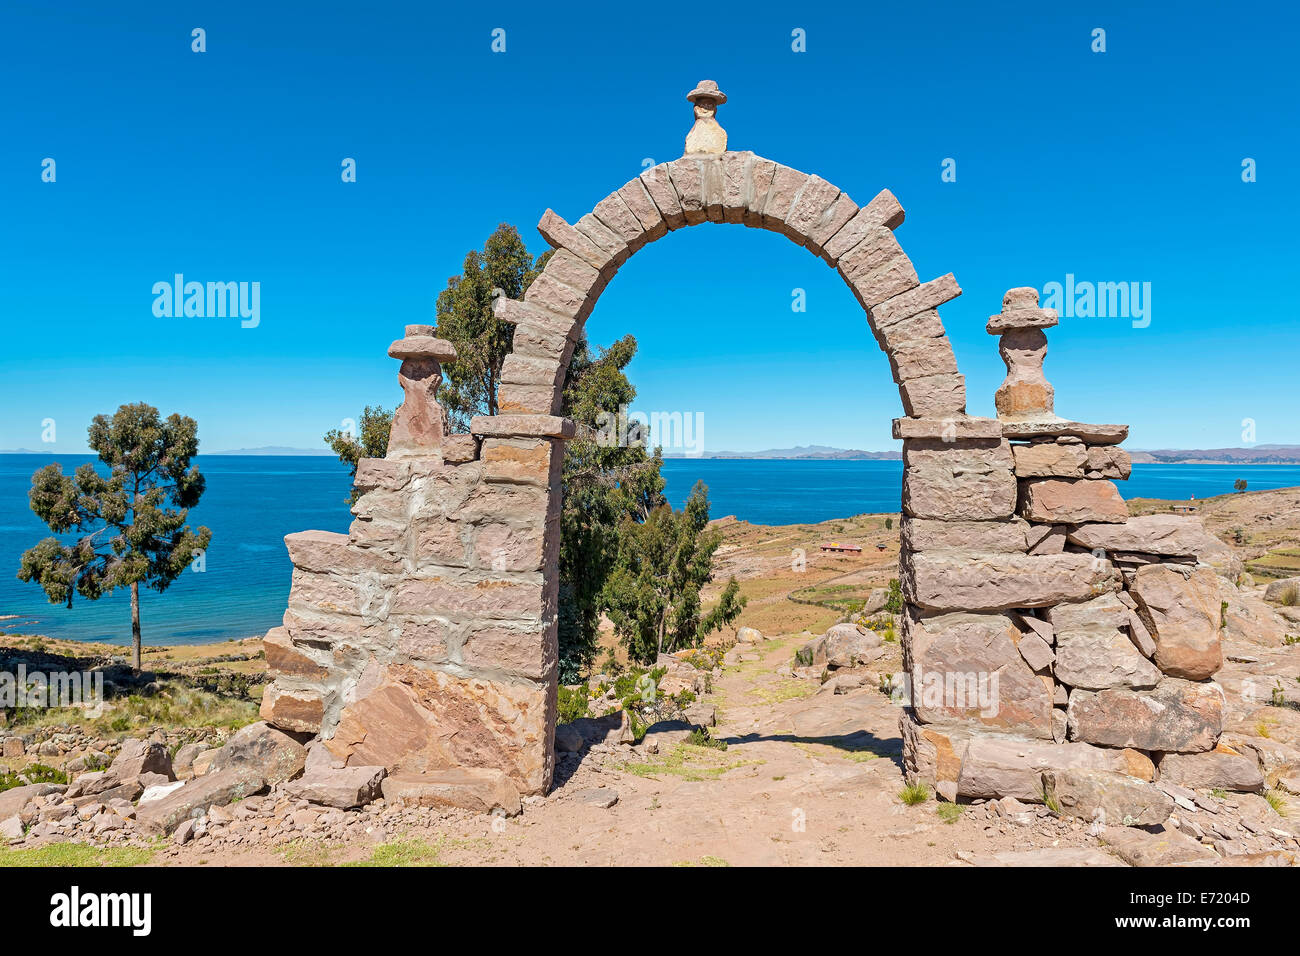 Torbogen, Insel Taquile, Titicacasee, Peru Stockfoto